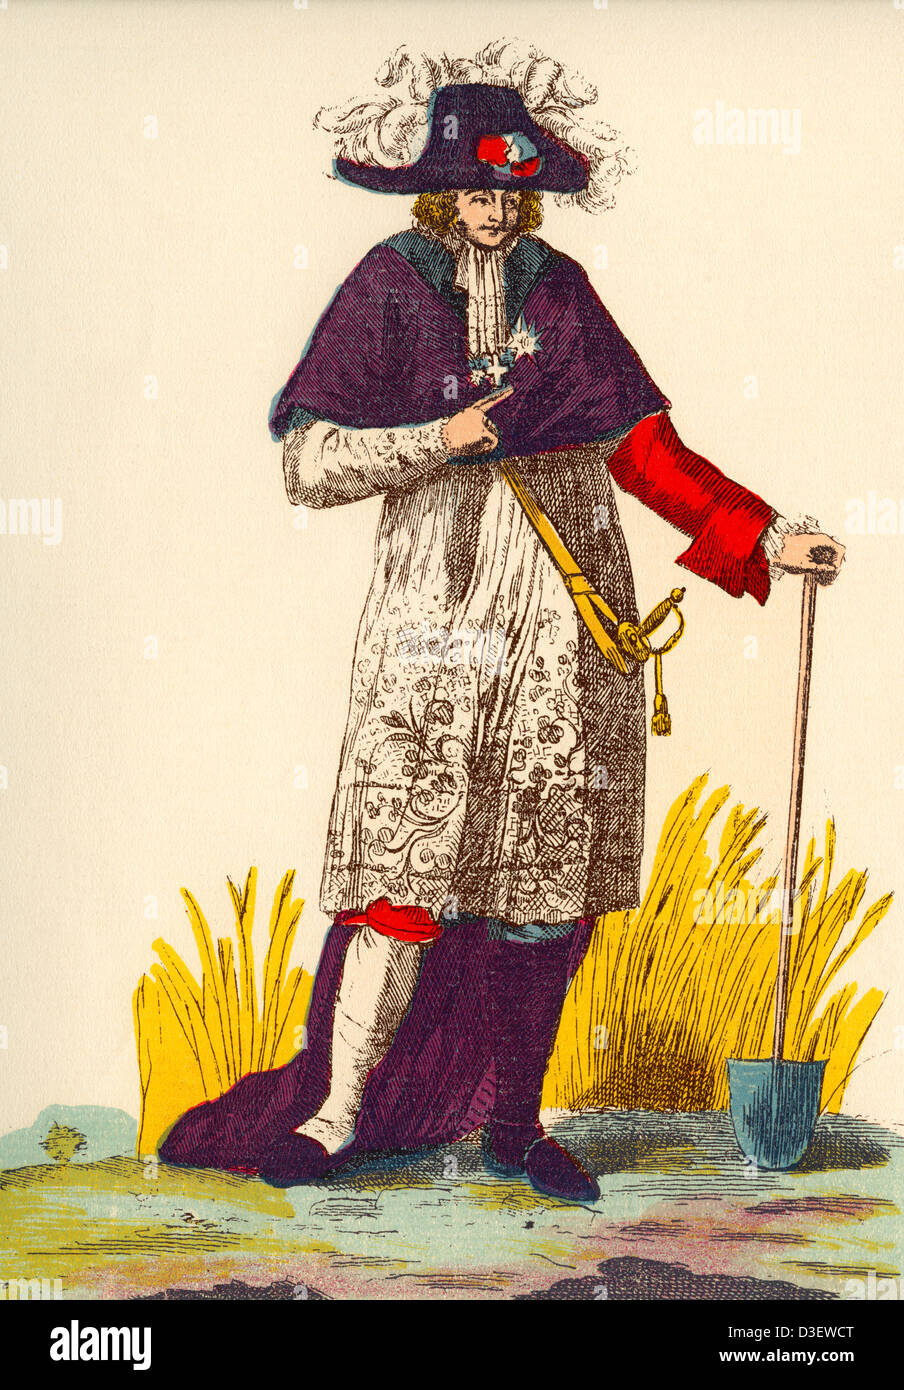 Man wearing mixture of clothes representing the Three Orders - Clergy, Nobility and Worker - in France during French Revolution. Stock Photo